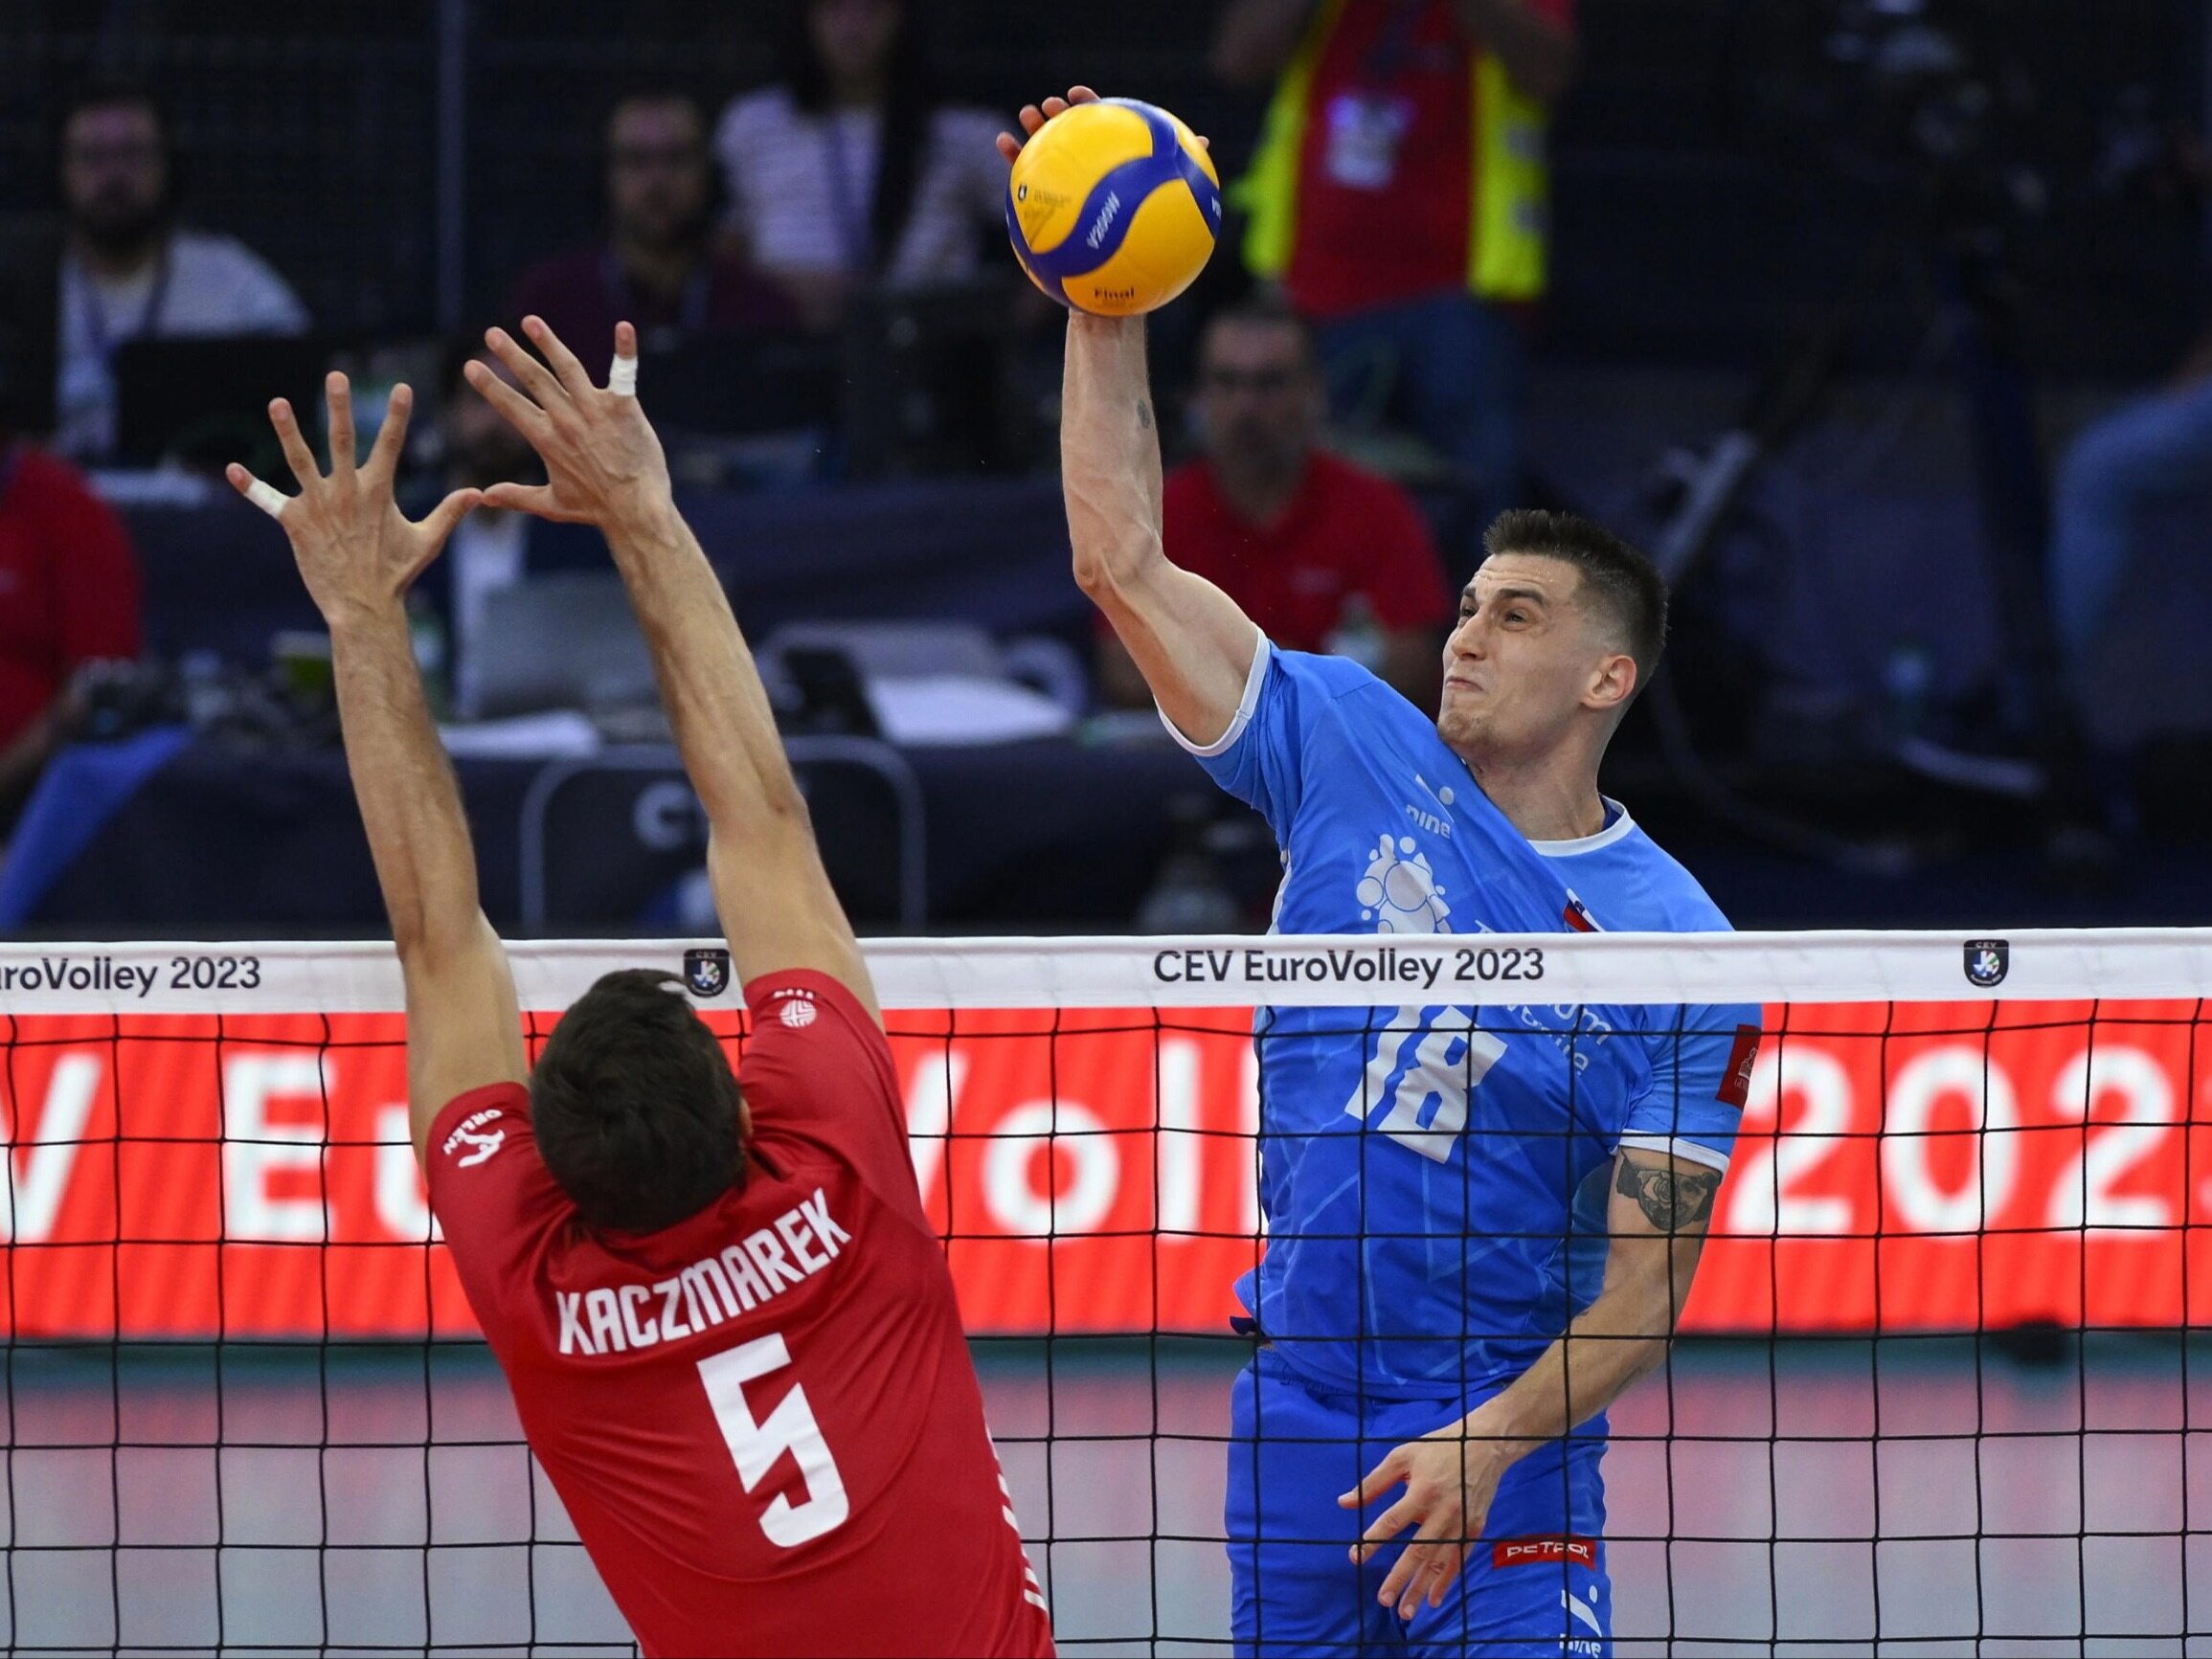 The star of the Slovenian national team spoke out after the defeat.  The volleyball player pointed out the advantage of the Poles